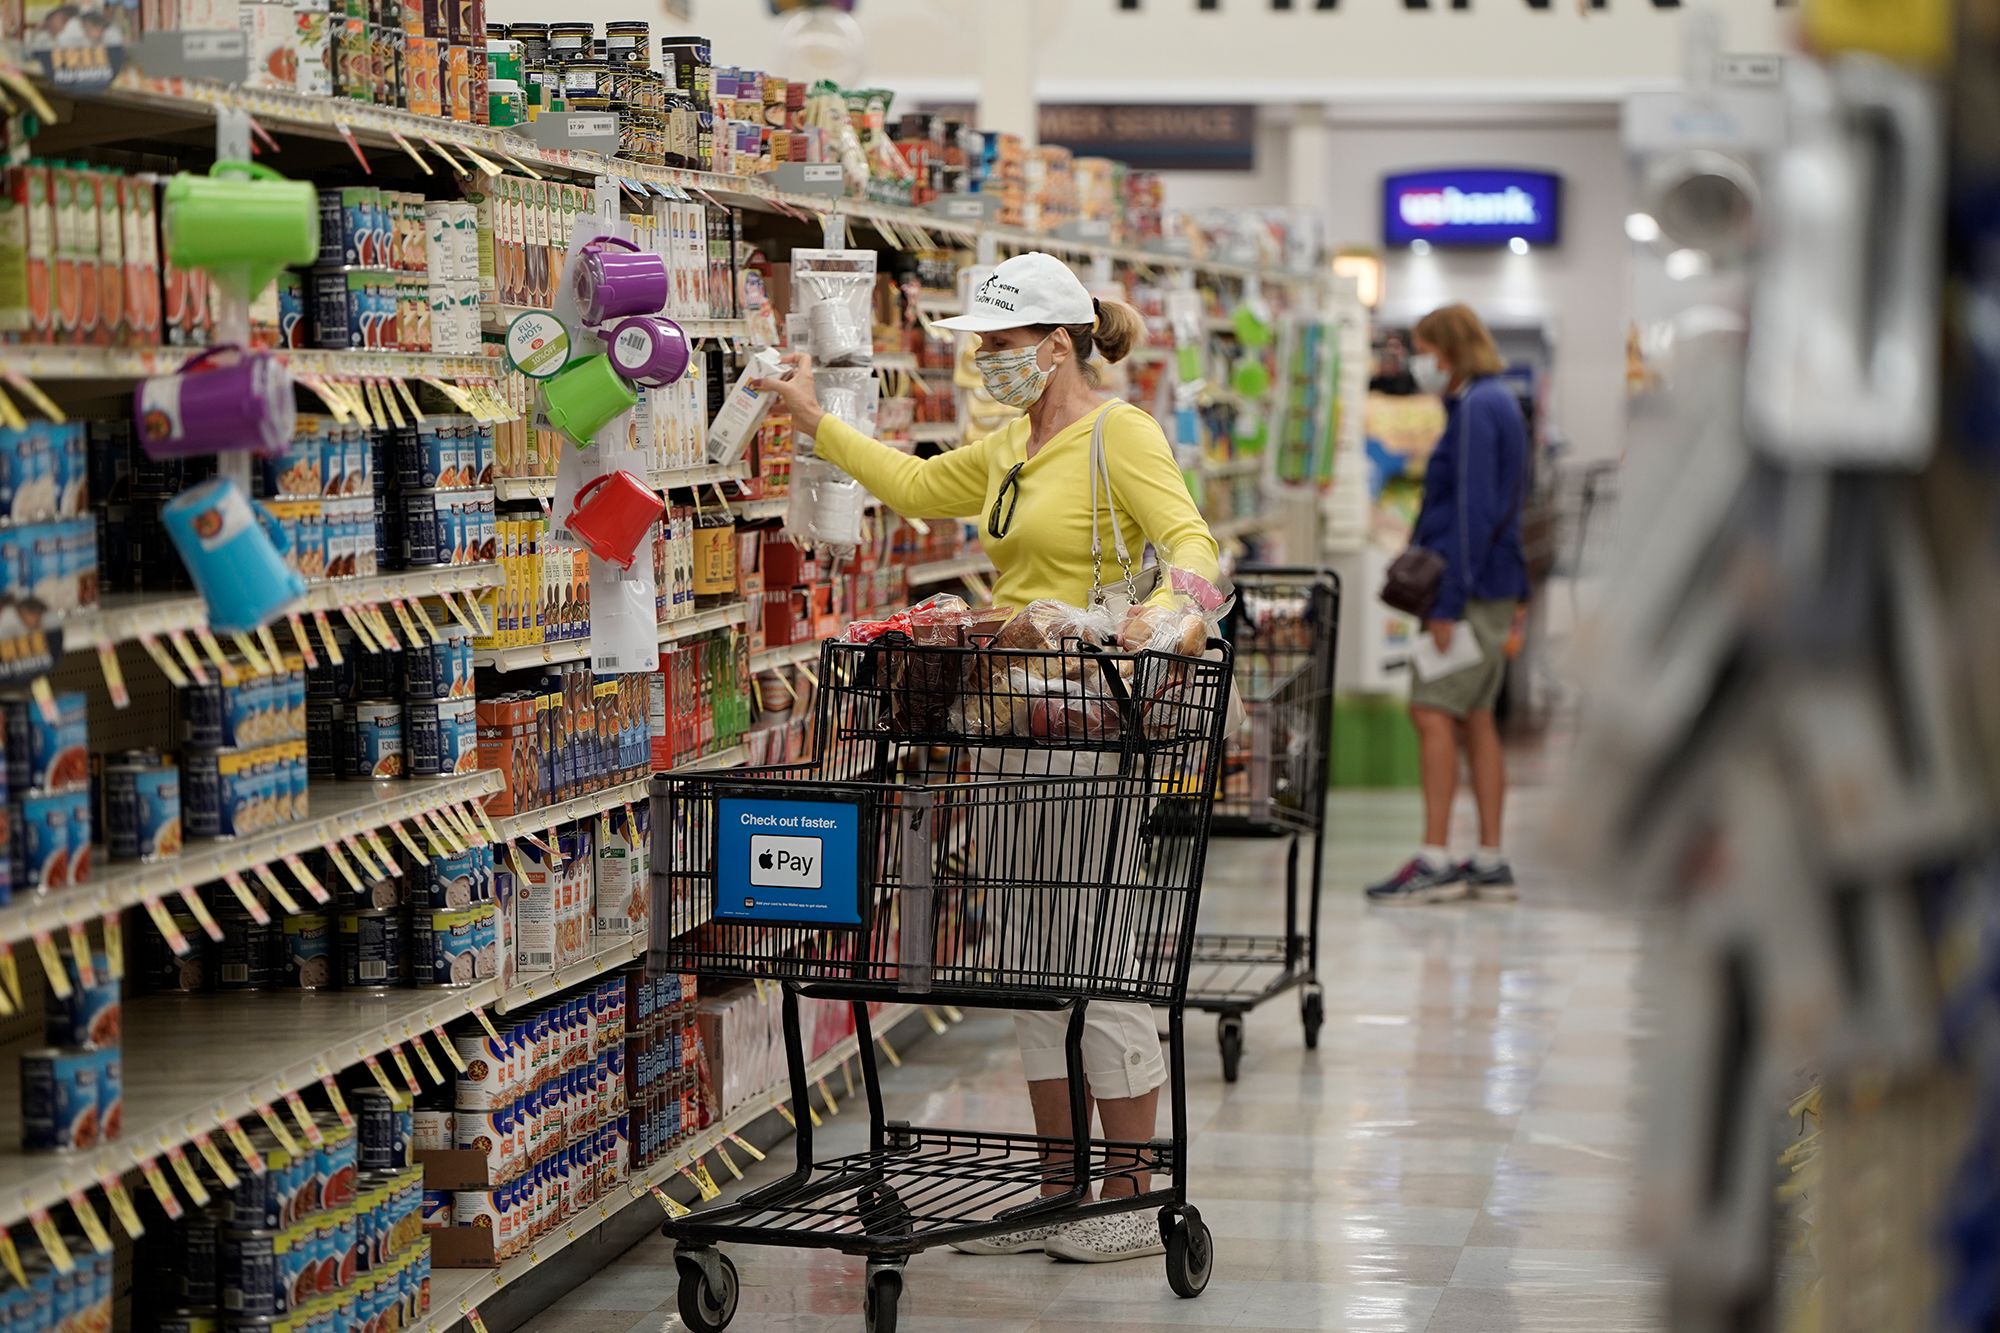 Why Do Items Go on Sale at the Grocery Store?